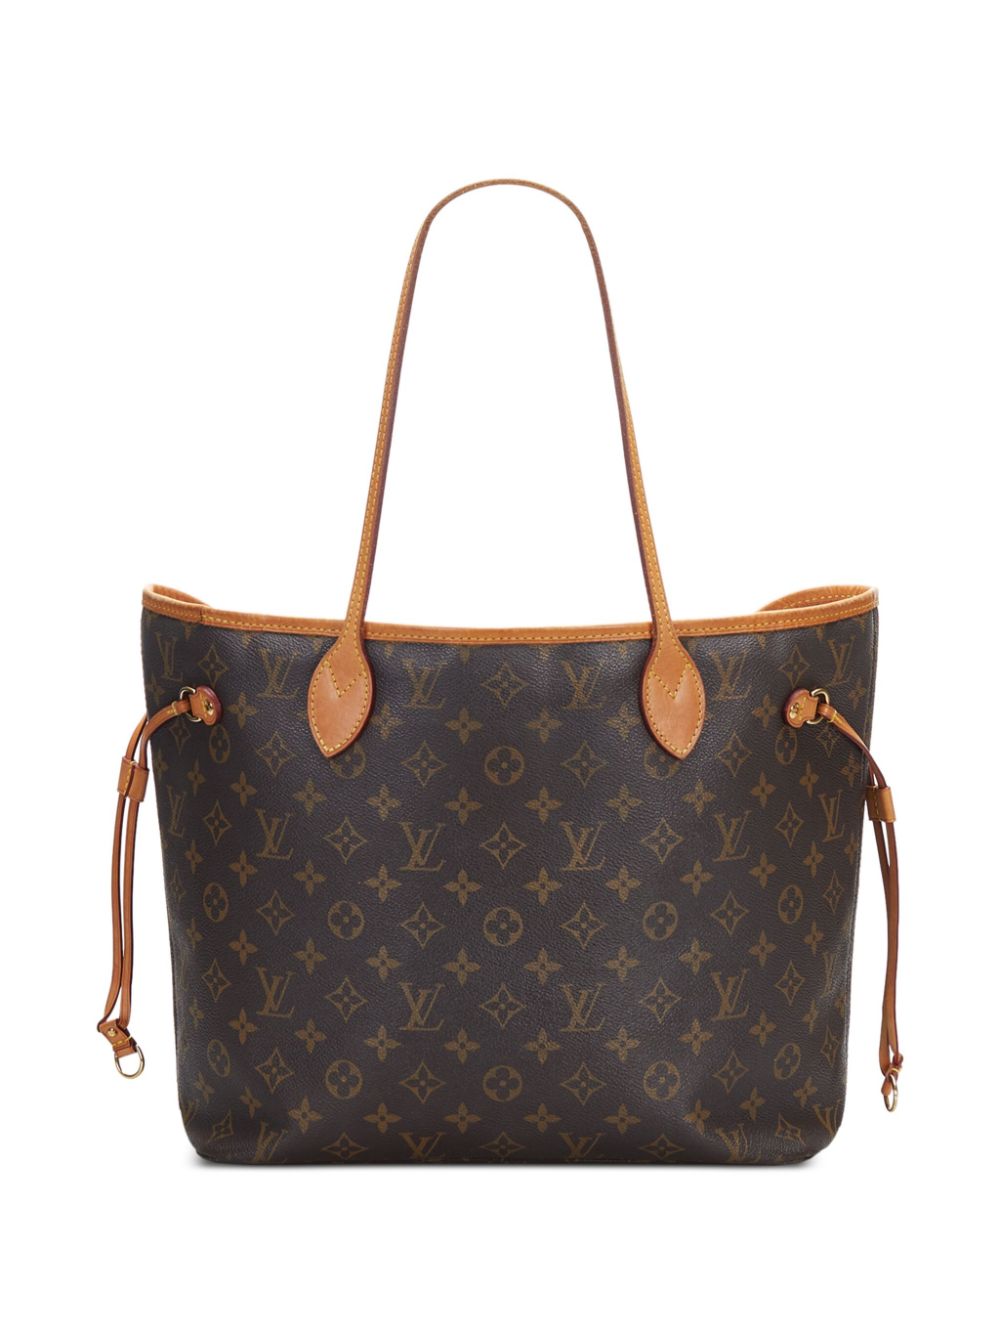 Louis Vuitton 2018 pre-owned Neverfull MM tote bag - Bruin